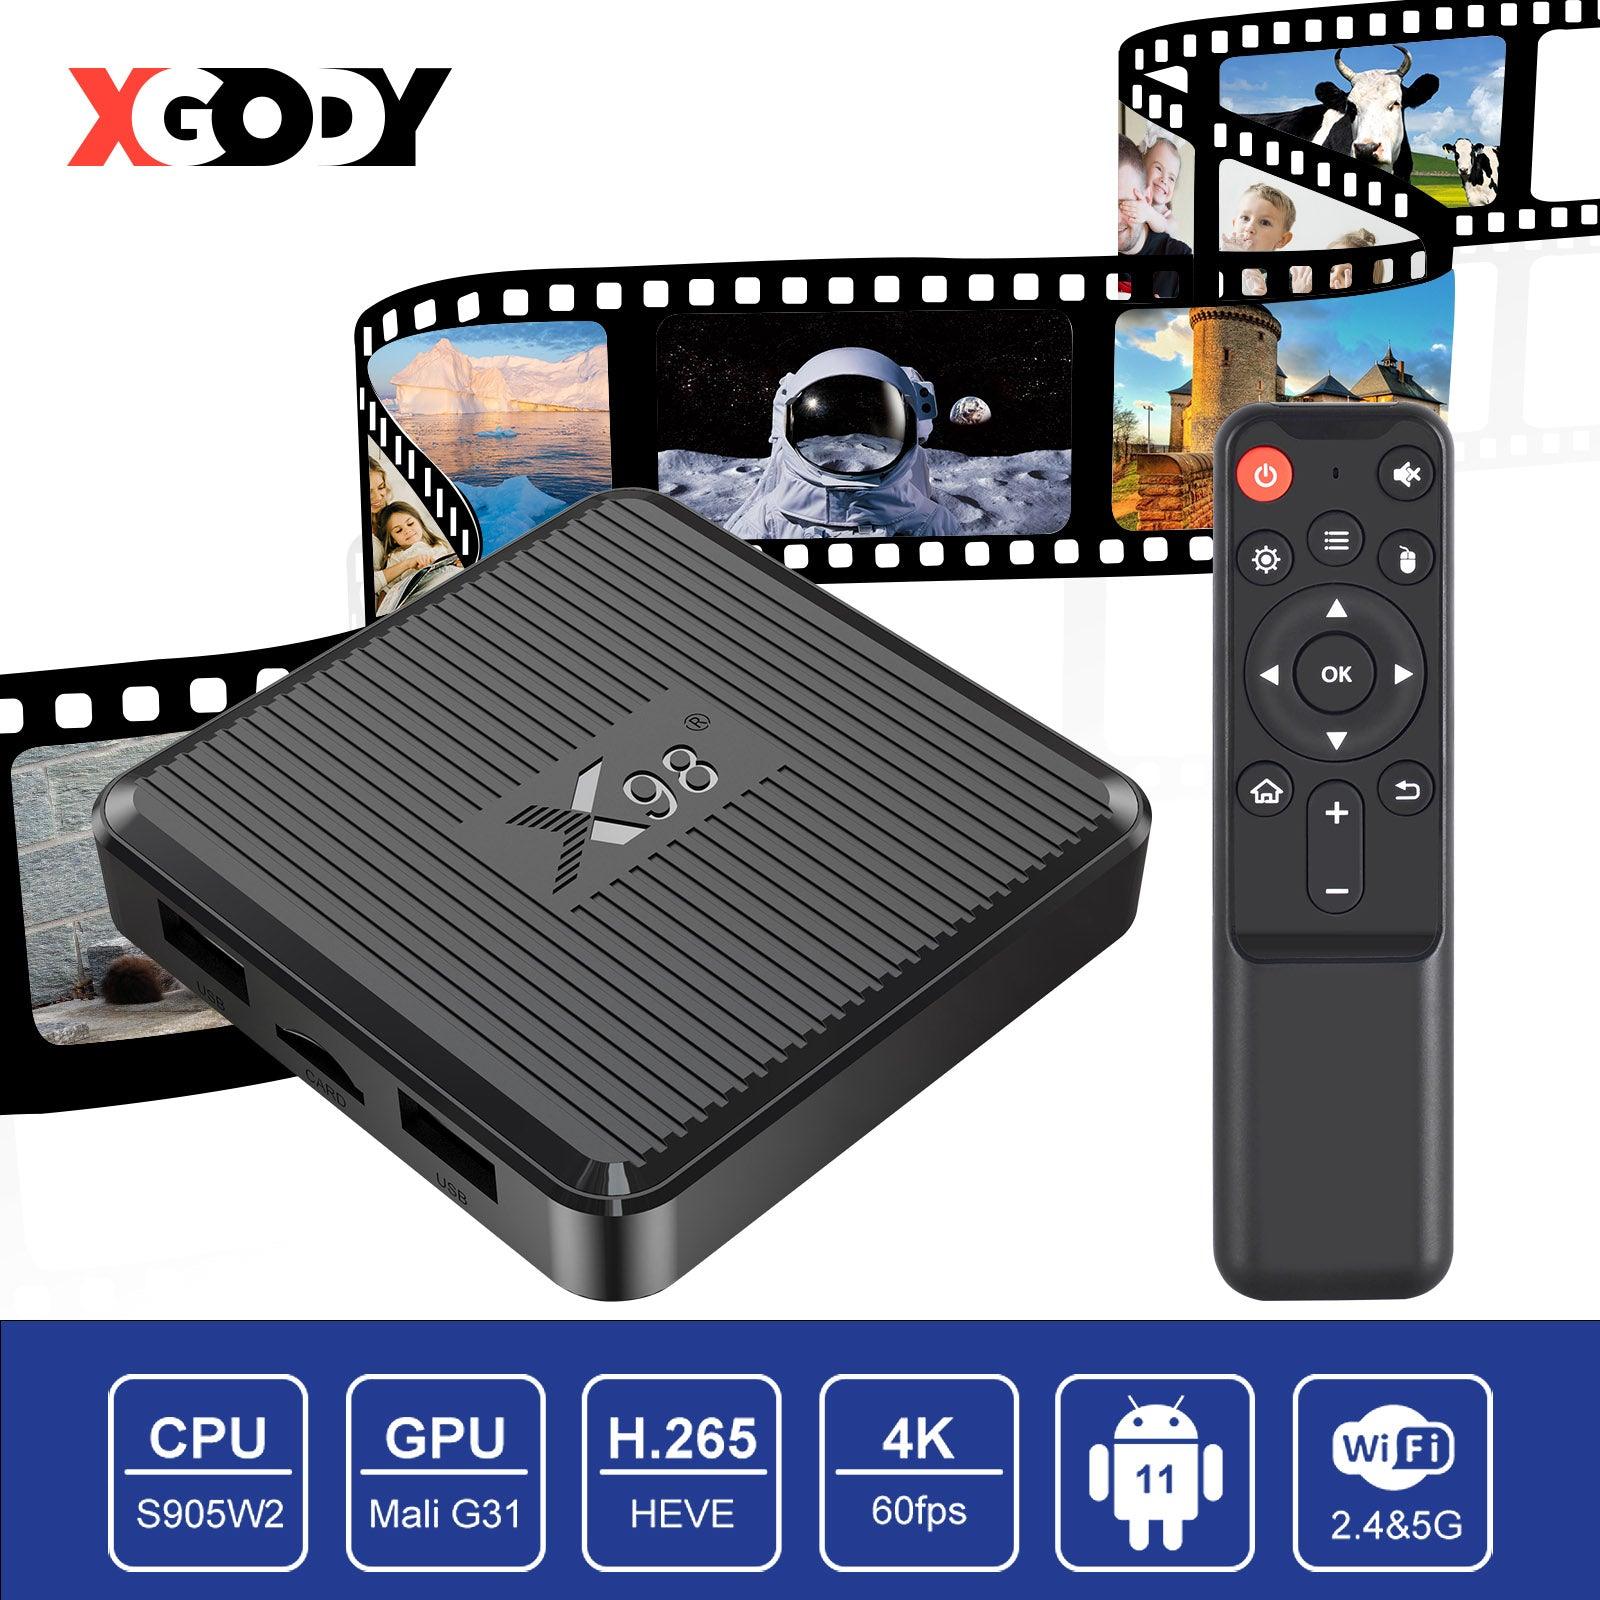 Cost-effective and Most worthwhile X98Q HDMI Android 11.0 Smart TV Box 4K, 2.4/5G Dual WiFi & Bluetooth, 16GB build-in Disney, Netflix - XGODY 